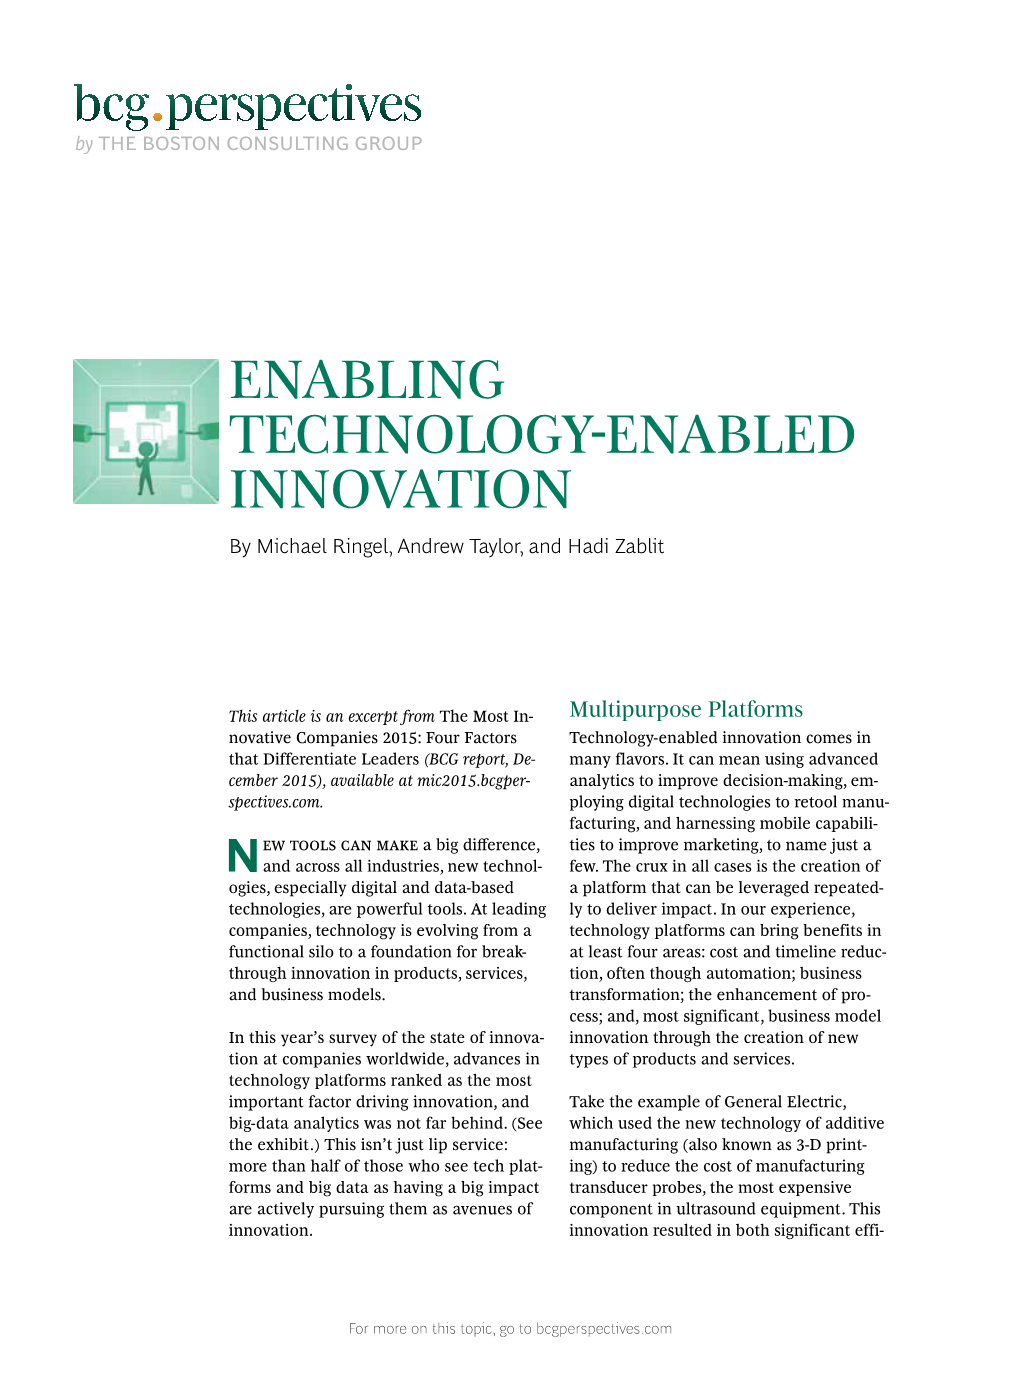 ENABLING TECHNOLOGY-ENABLED INNOVATION by Michael Ringel, Andrew Taylor, and Hadi Zablit